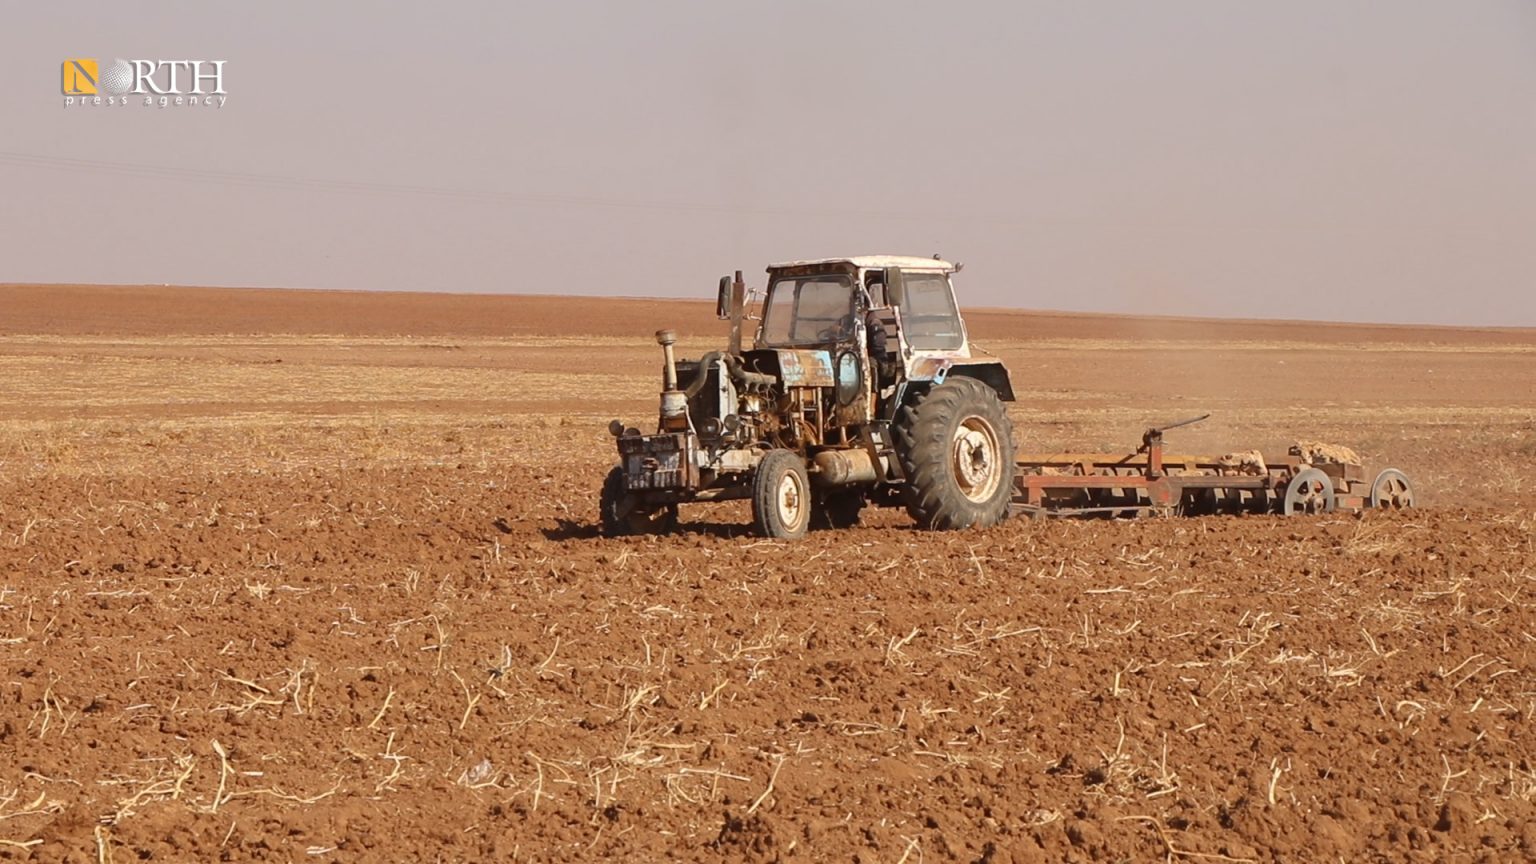 The AANES controls most of wheat production in Syria. Photo by North Press.